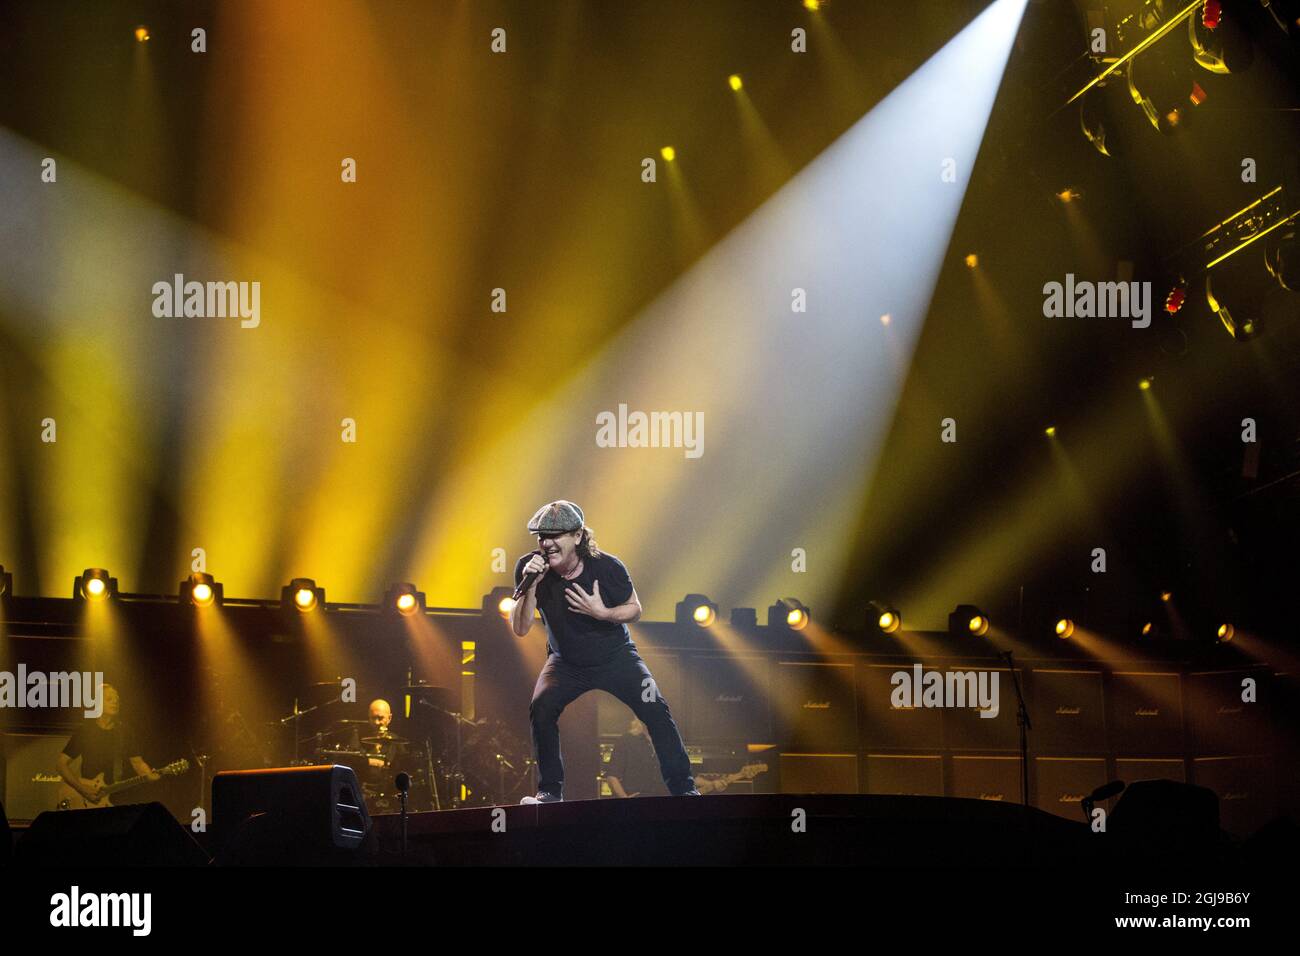 STOCKHOLM 2015-07-19 AC/DC:s Brian Johnson during the bands performance at Friends arena in Solna, Stockholm this sunday. Foto: Christine Olsson / TT / Kod 10430  Stock Photo